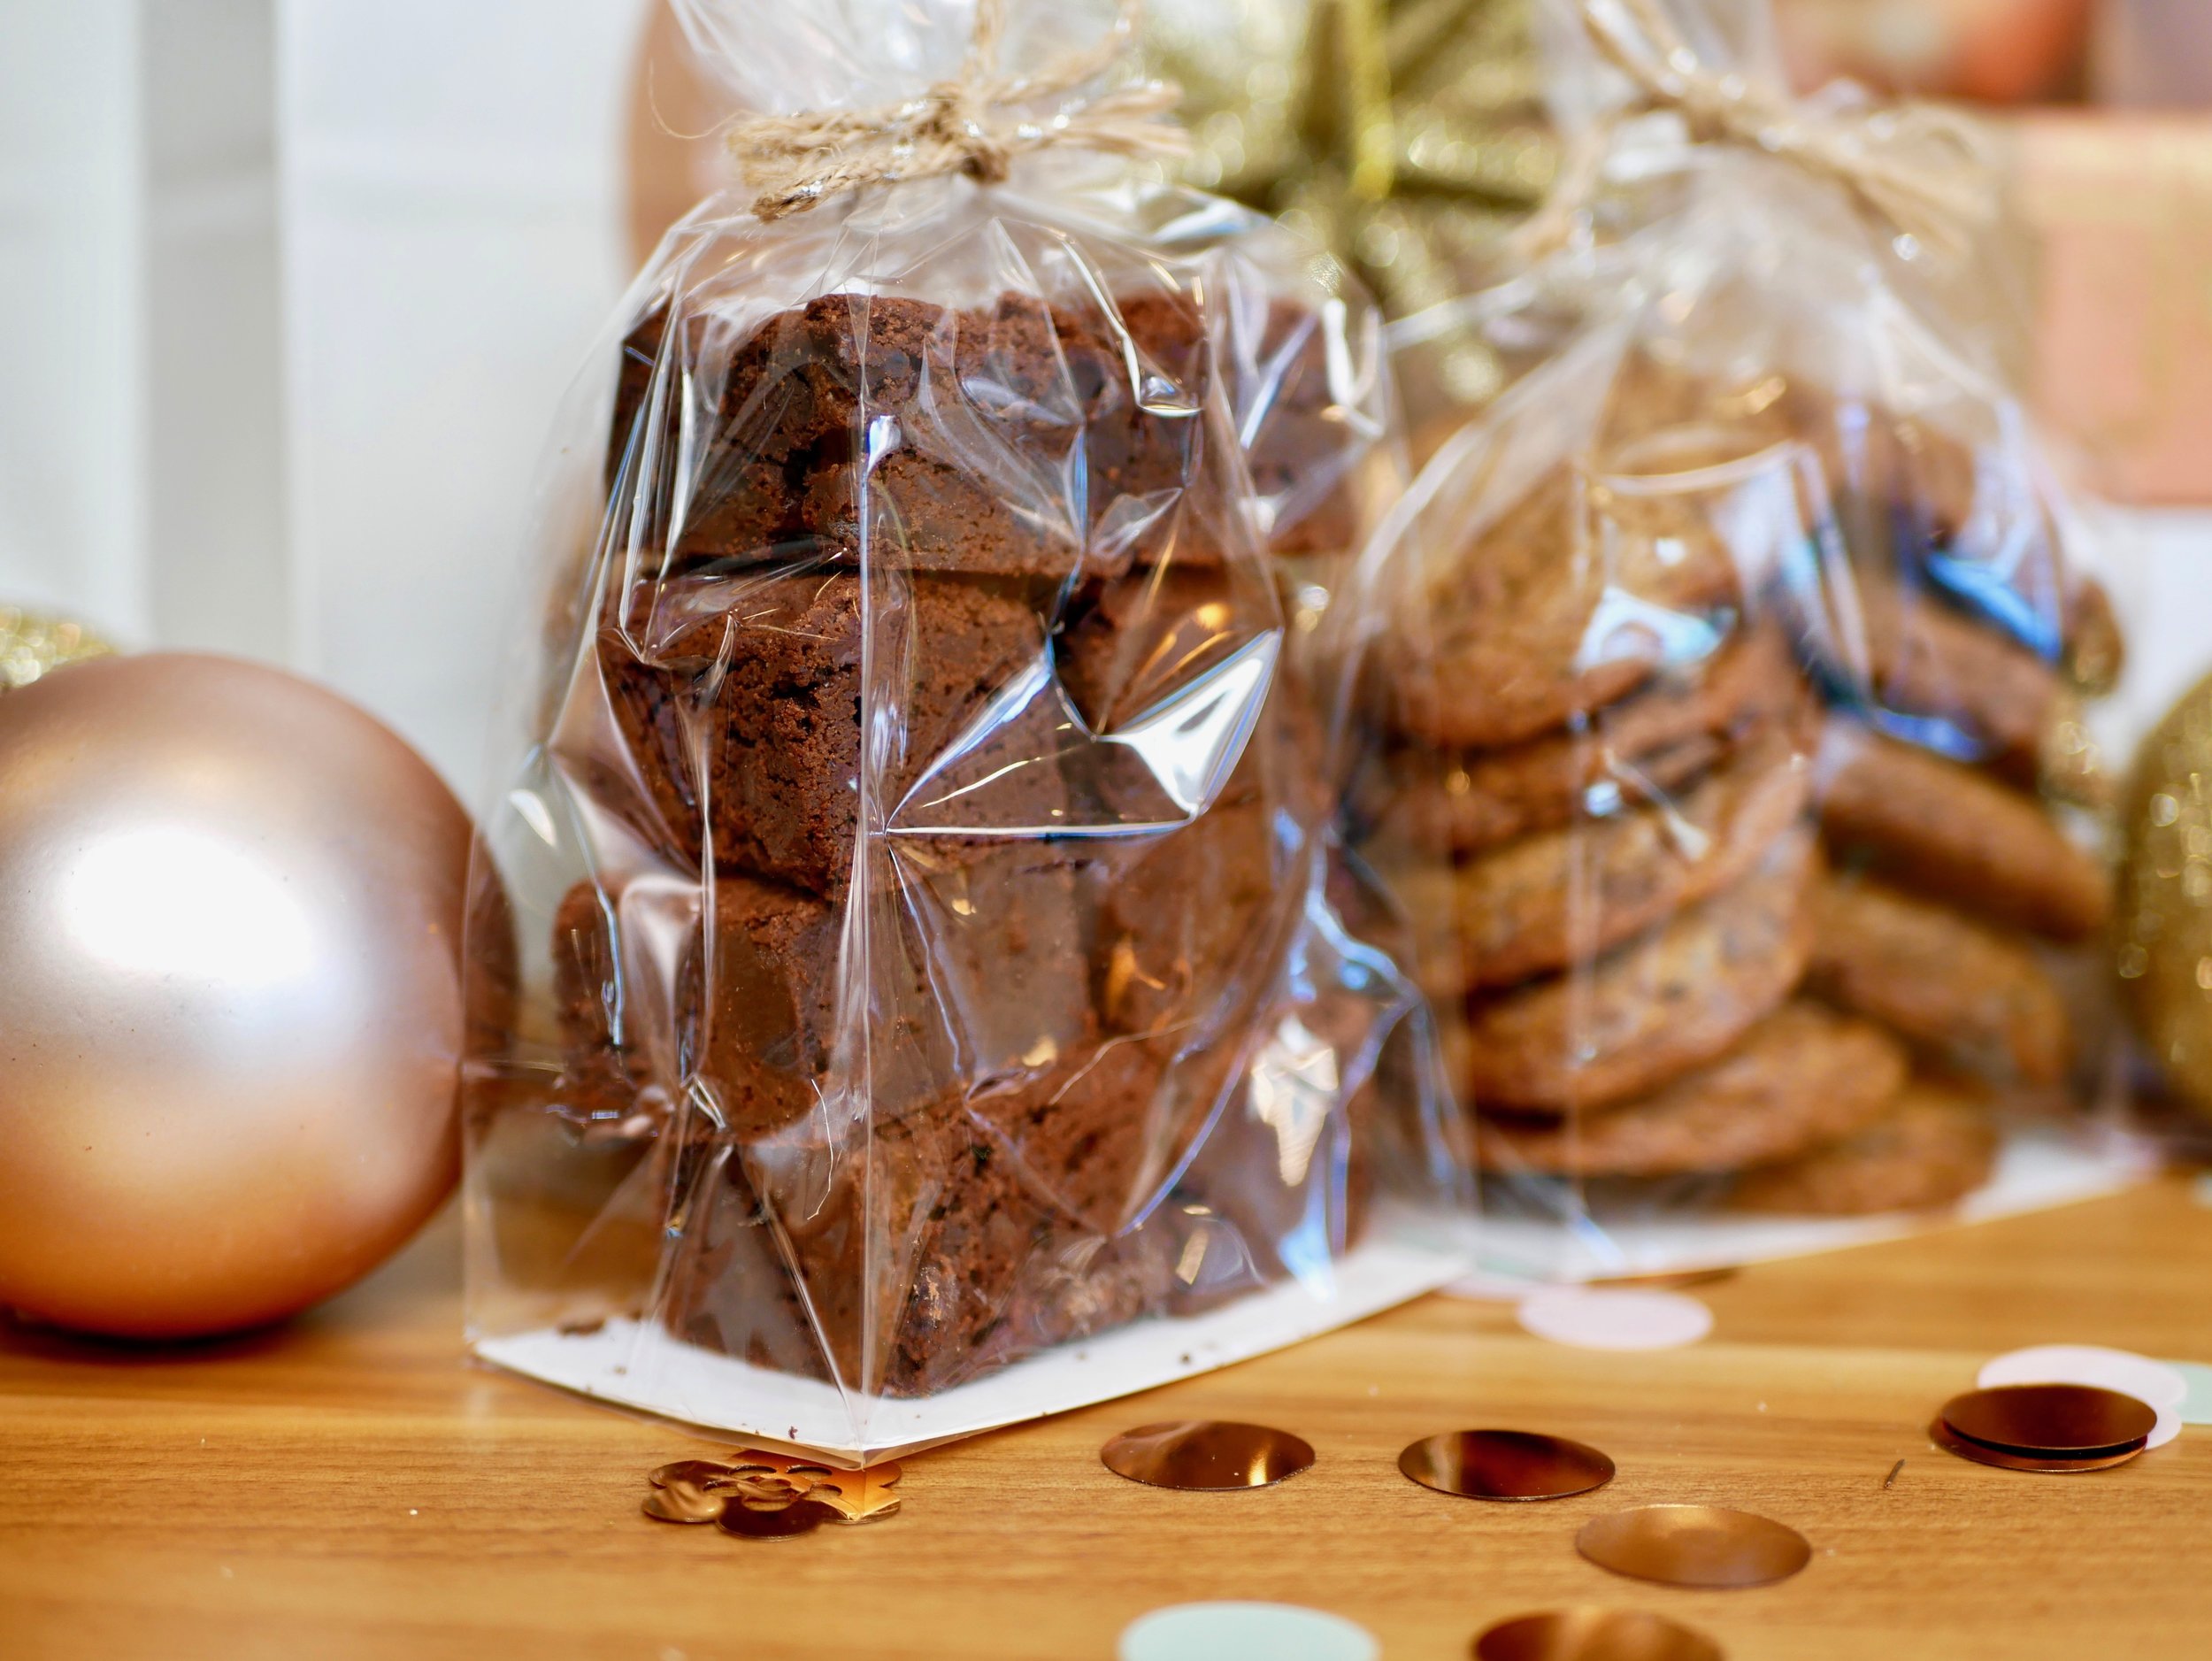 Delicious brownies and cookies for holiday gifting!